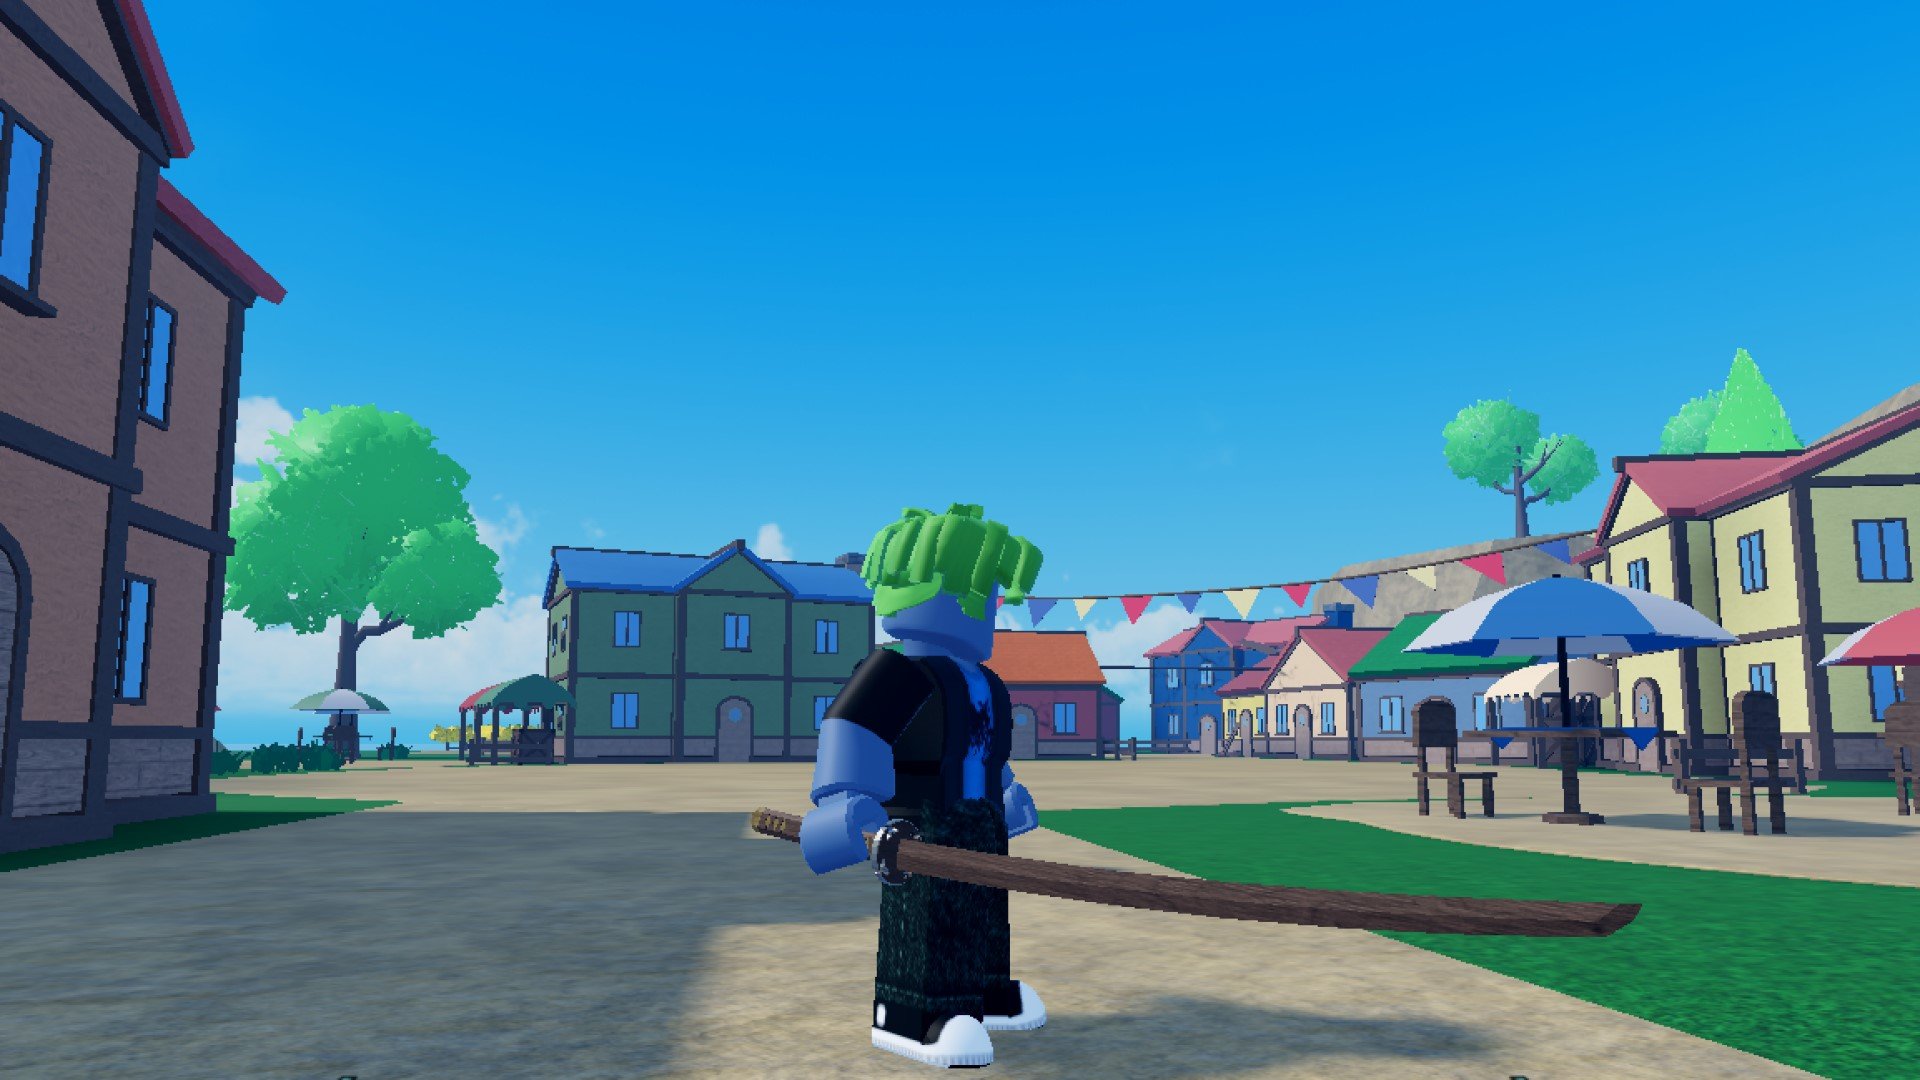 A character from Roblox game Cursed Sea standing near a seaside town. They're holding a katana.